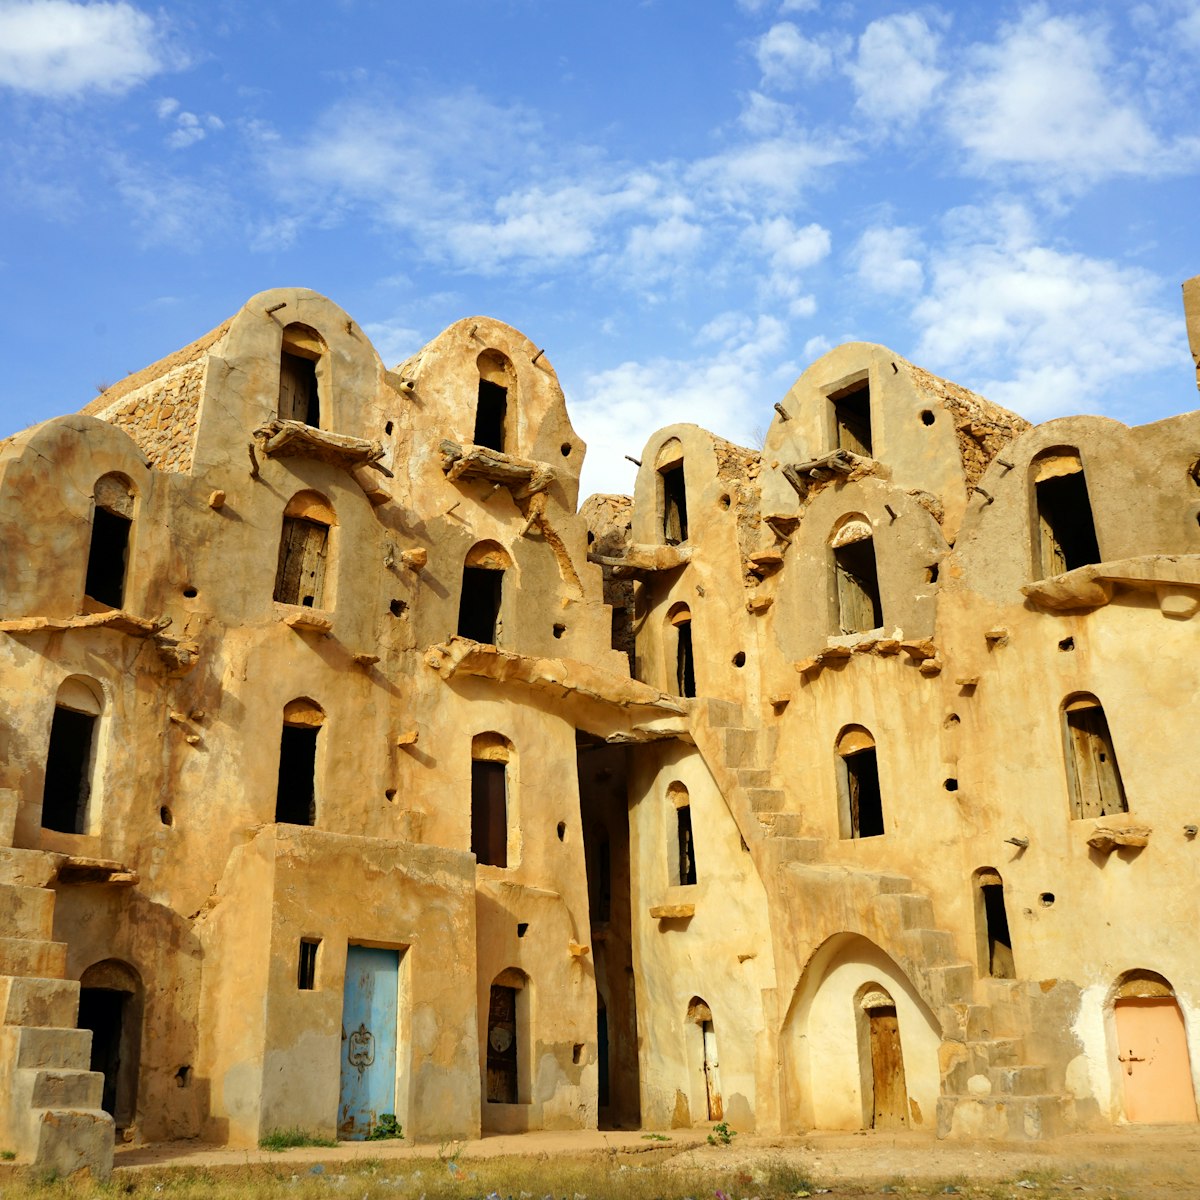 Ksar Ezzahra, Tataouine, southern Tunisia; Shutterstock ID 671436523; Your name (First / Last): Lauren Keith; GL account no.: 65050; Netsuite department name: Online Editorial; Full Product or Project name including edition: Tunisia Destination Page image update